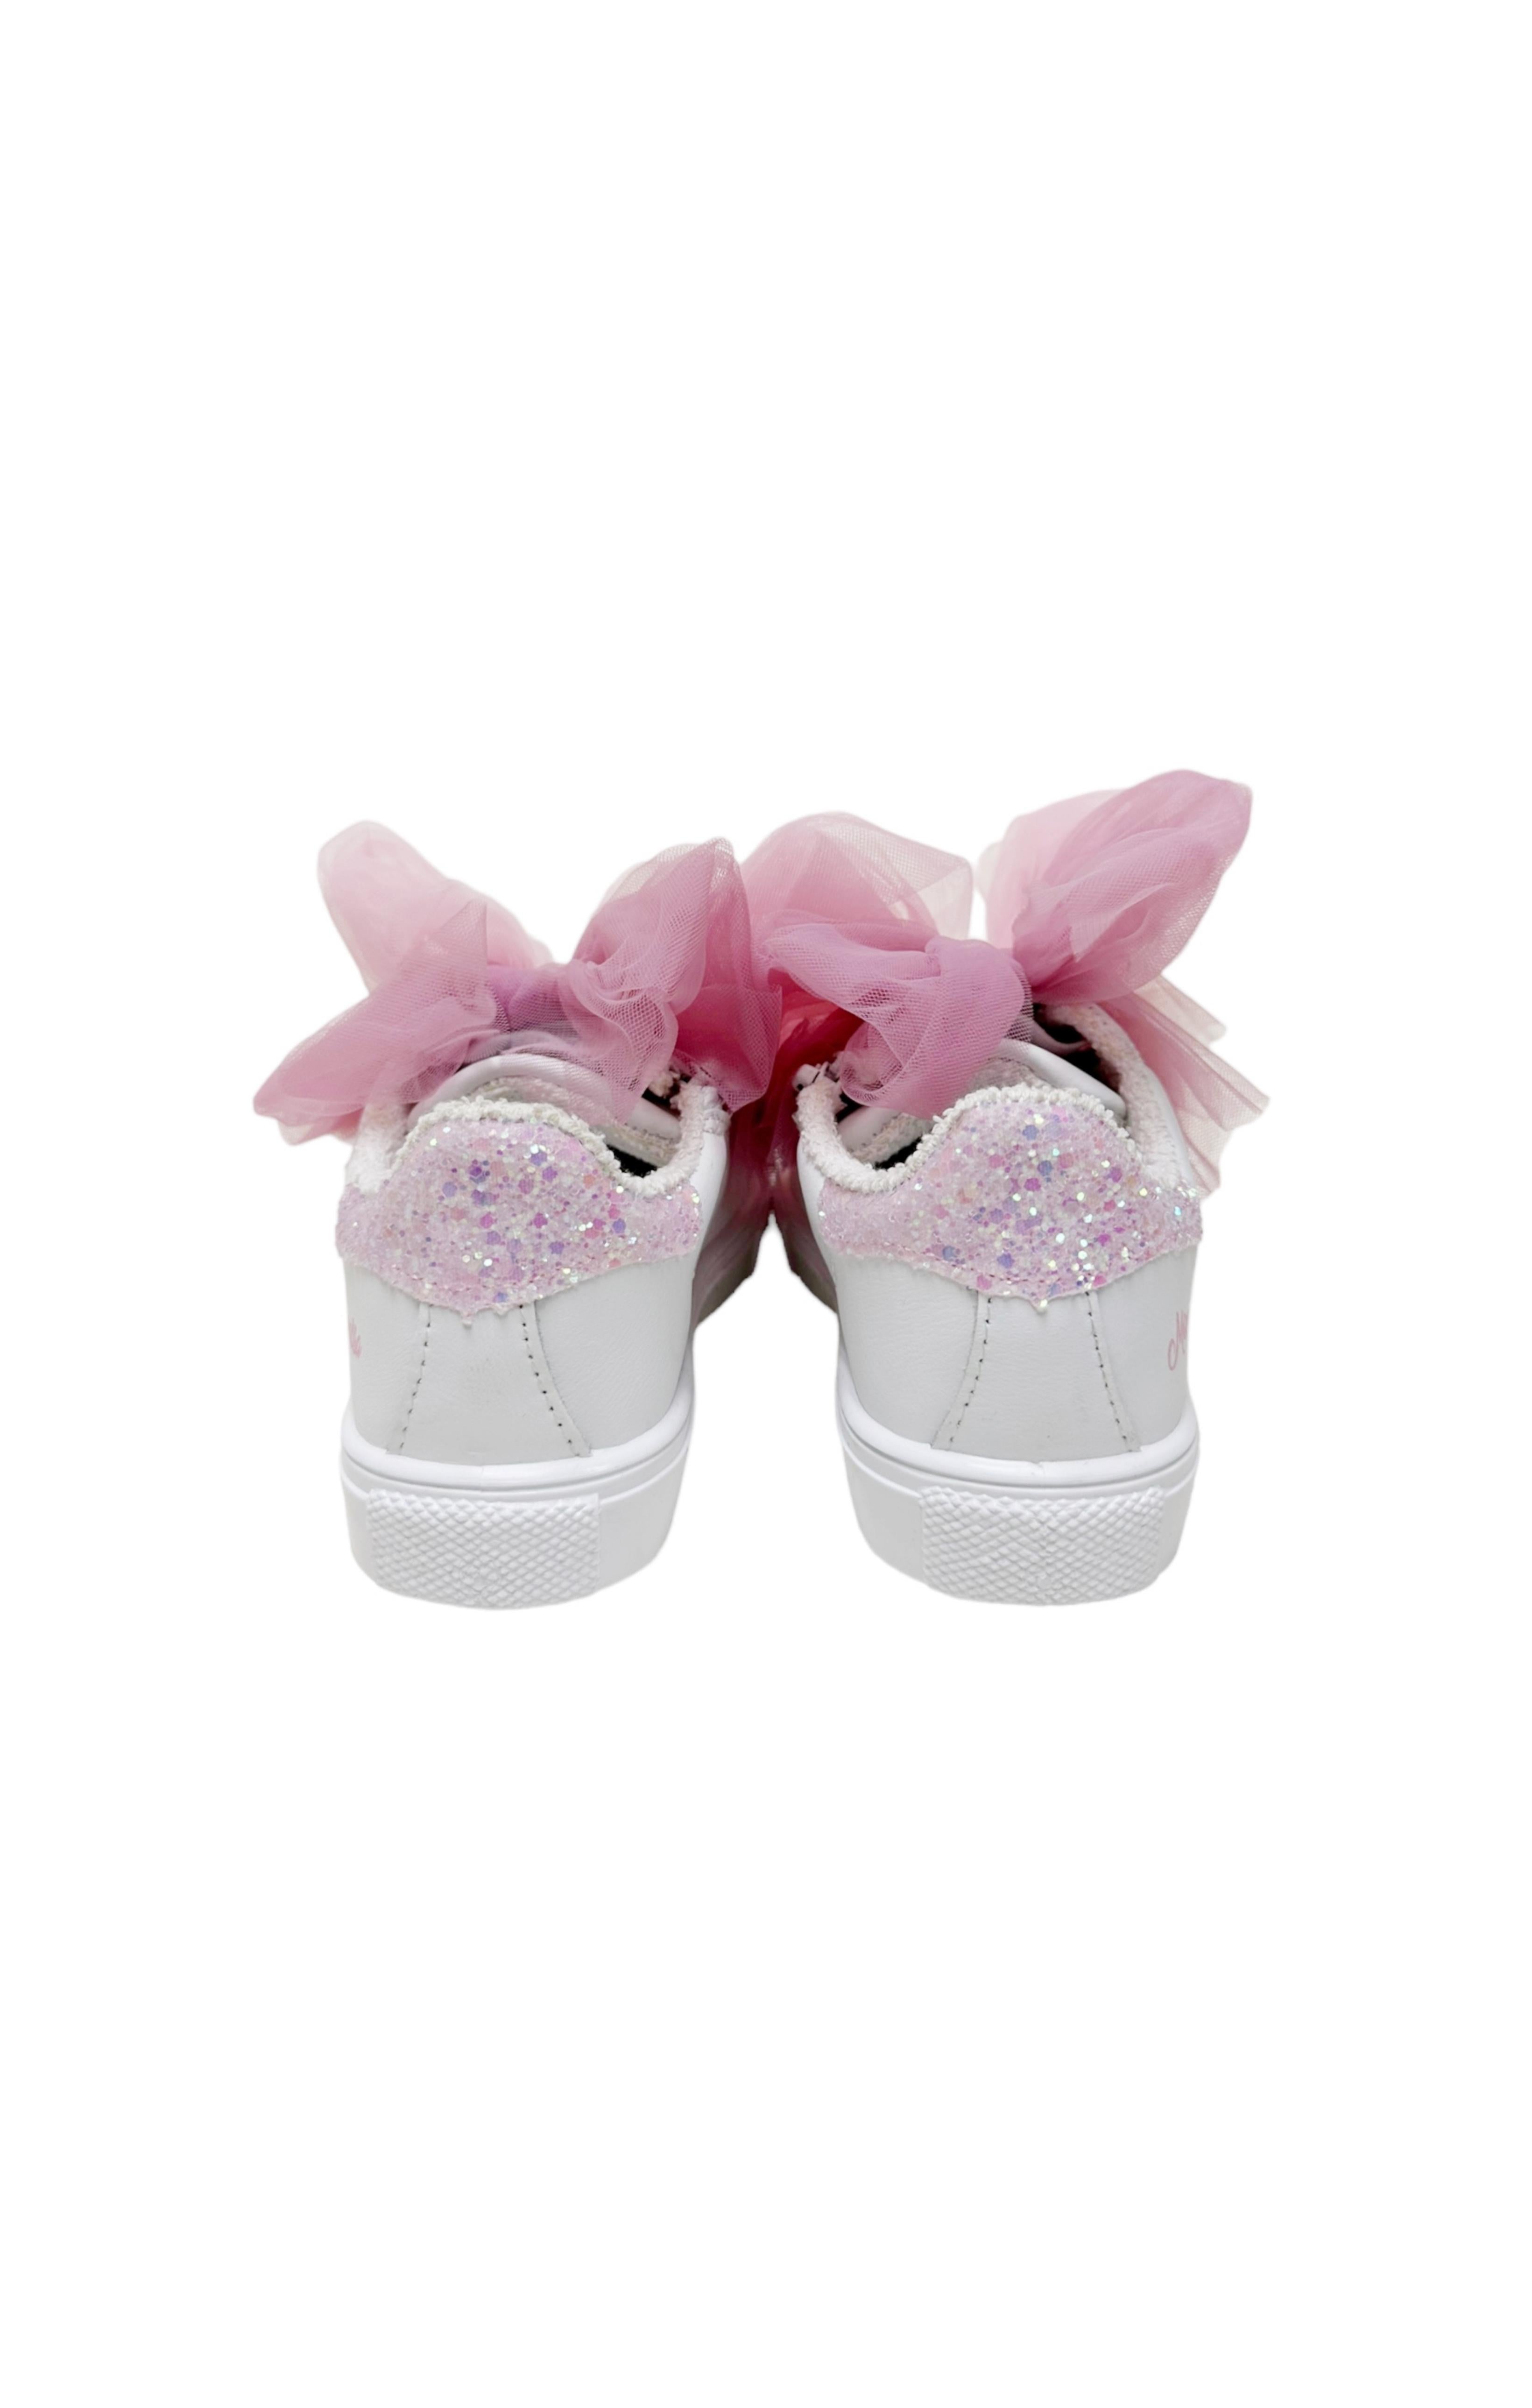 MONNALISA (RARE & NEW) Sneakers Size: EUR 29 / Fit like Toddler US 11.5